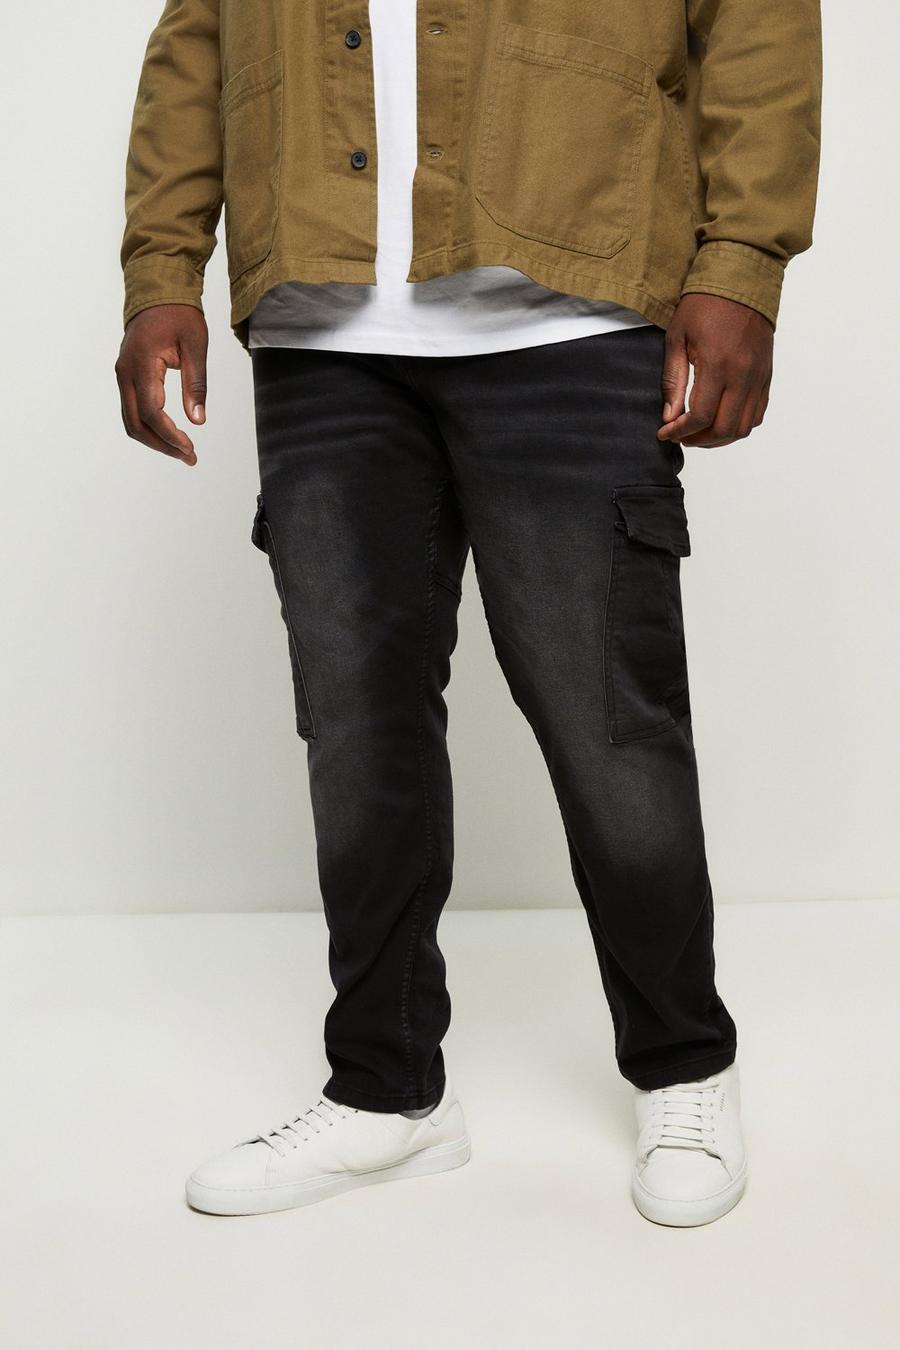 Plus And Tall Slim Washed Black Cargo Jeans